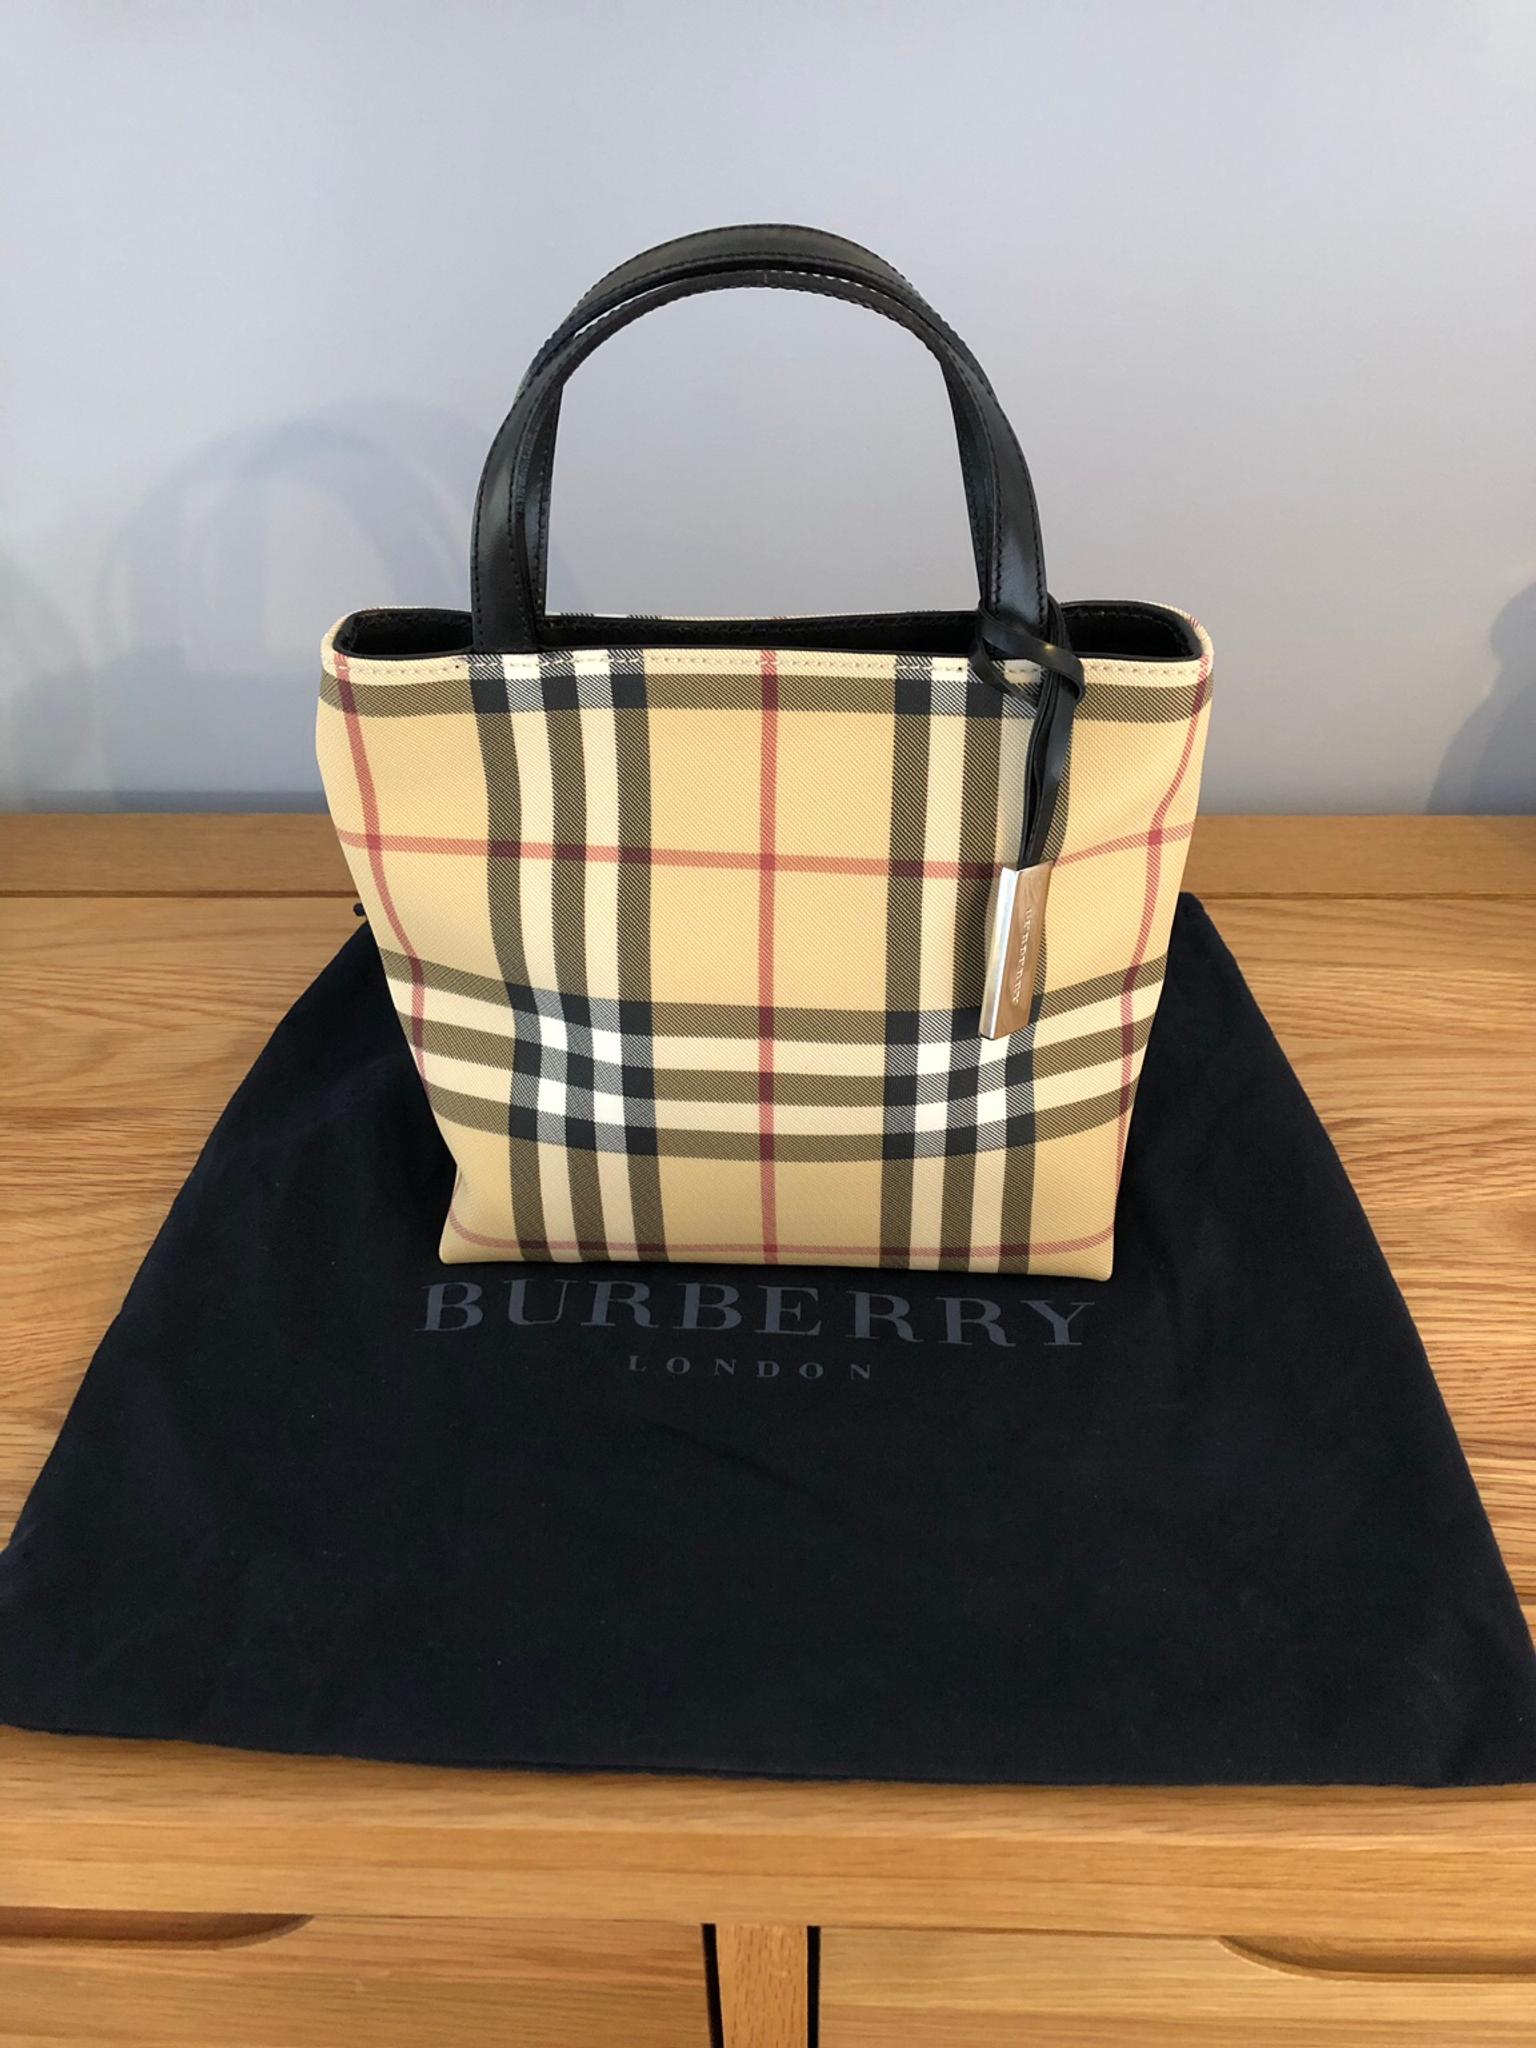 Burberry Small Tote Bag in NN10 